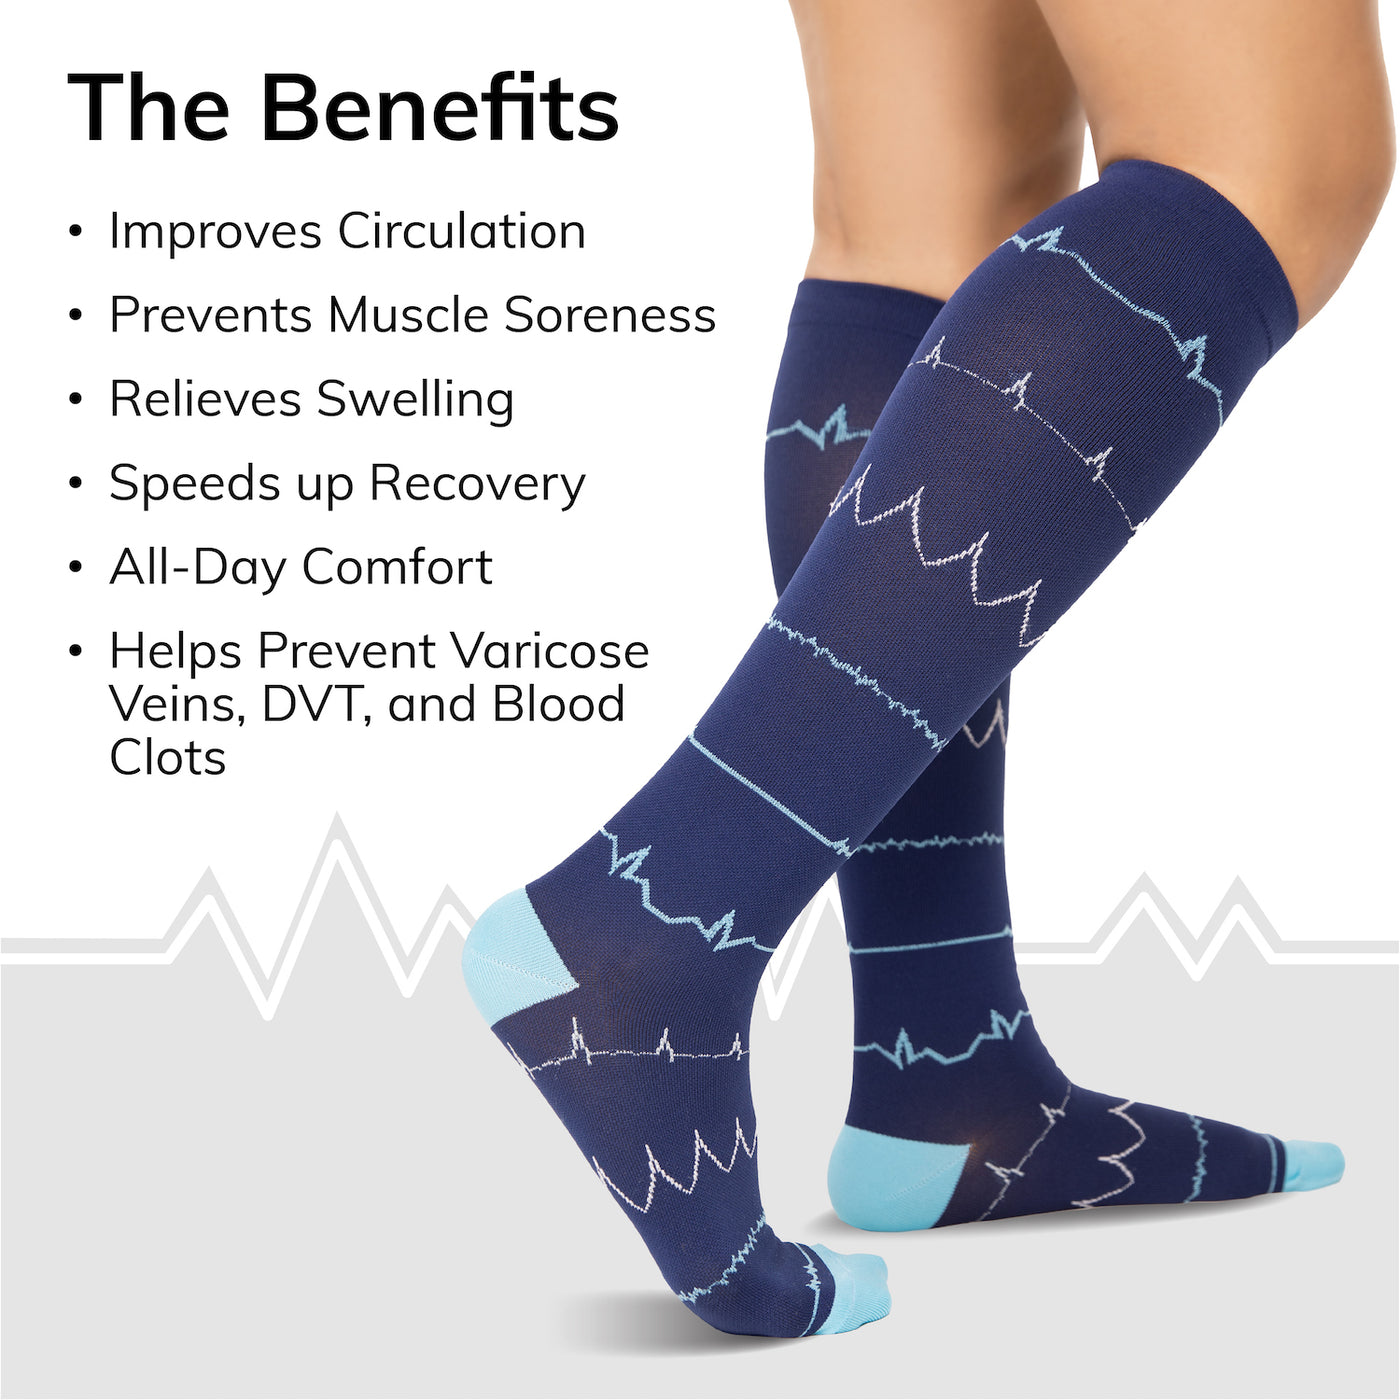 Can Wearing Compression Socks Be Harmful? True or False - StrideCare